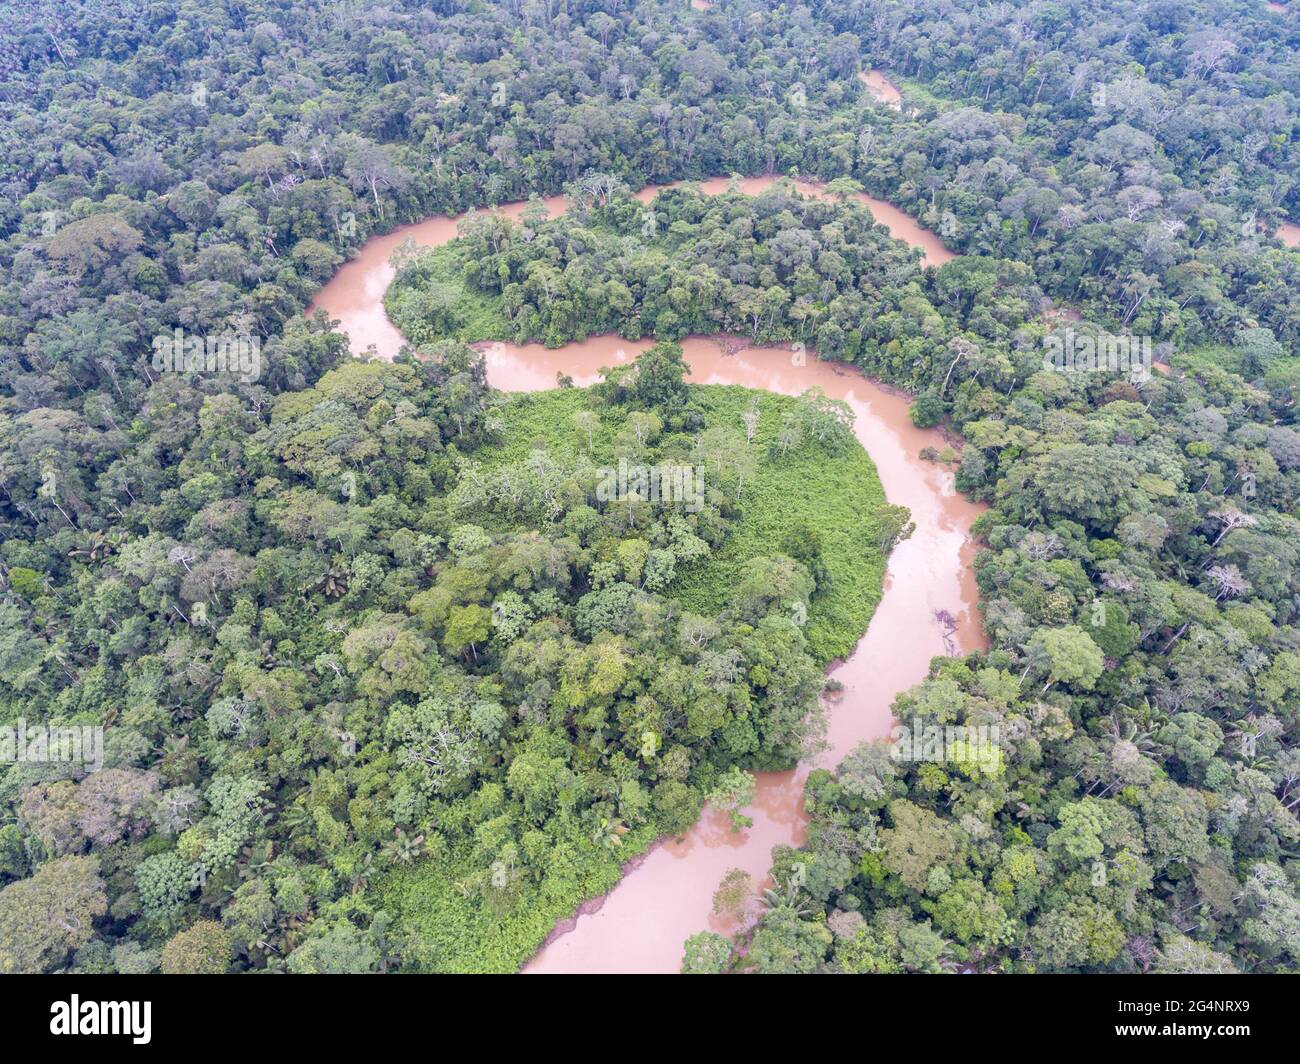 Aerial view of a bend in Rio Shiripuno, a tributary of the Amazon, flowing through pristine tropical rainforest in Ecuador Stock Photo